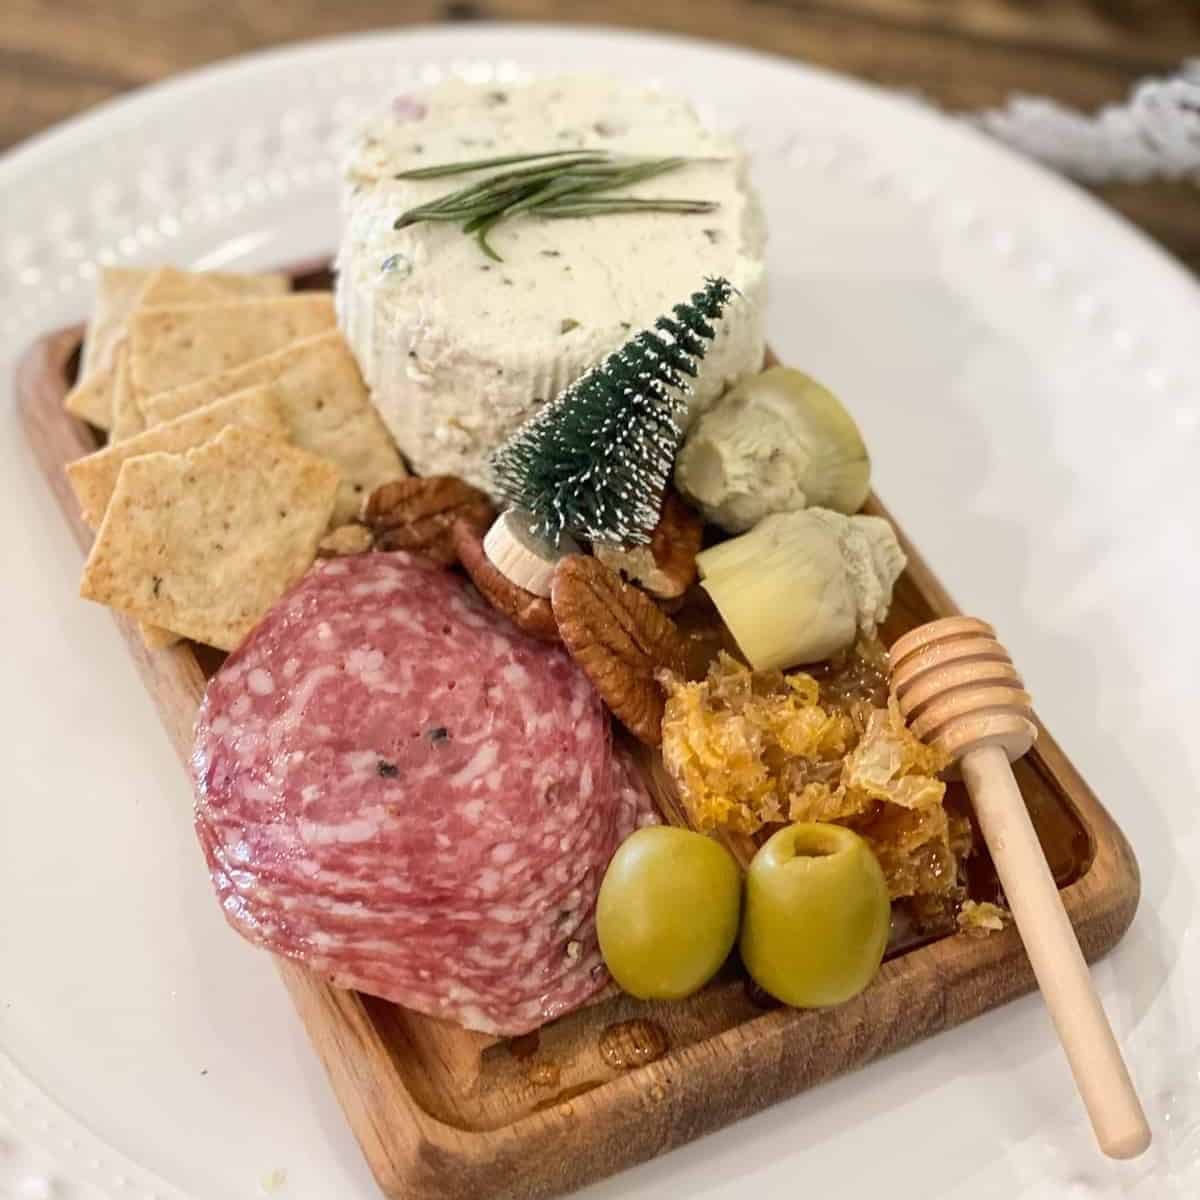 https://www.thisvivaciouslife.com/wp-content/uploads/2022/02/Small-Charcuterie-Board-1200x1200-1.jpg